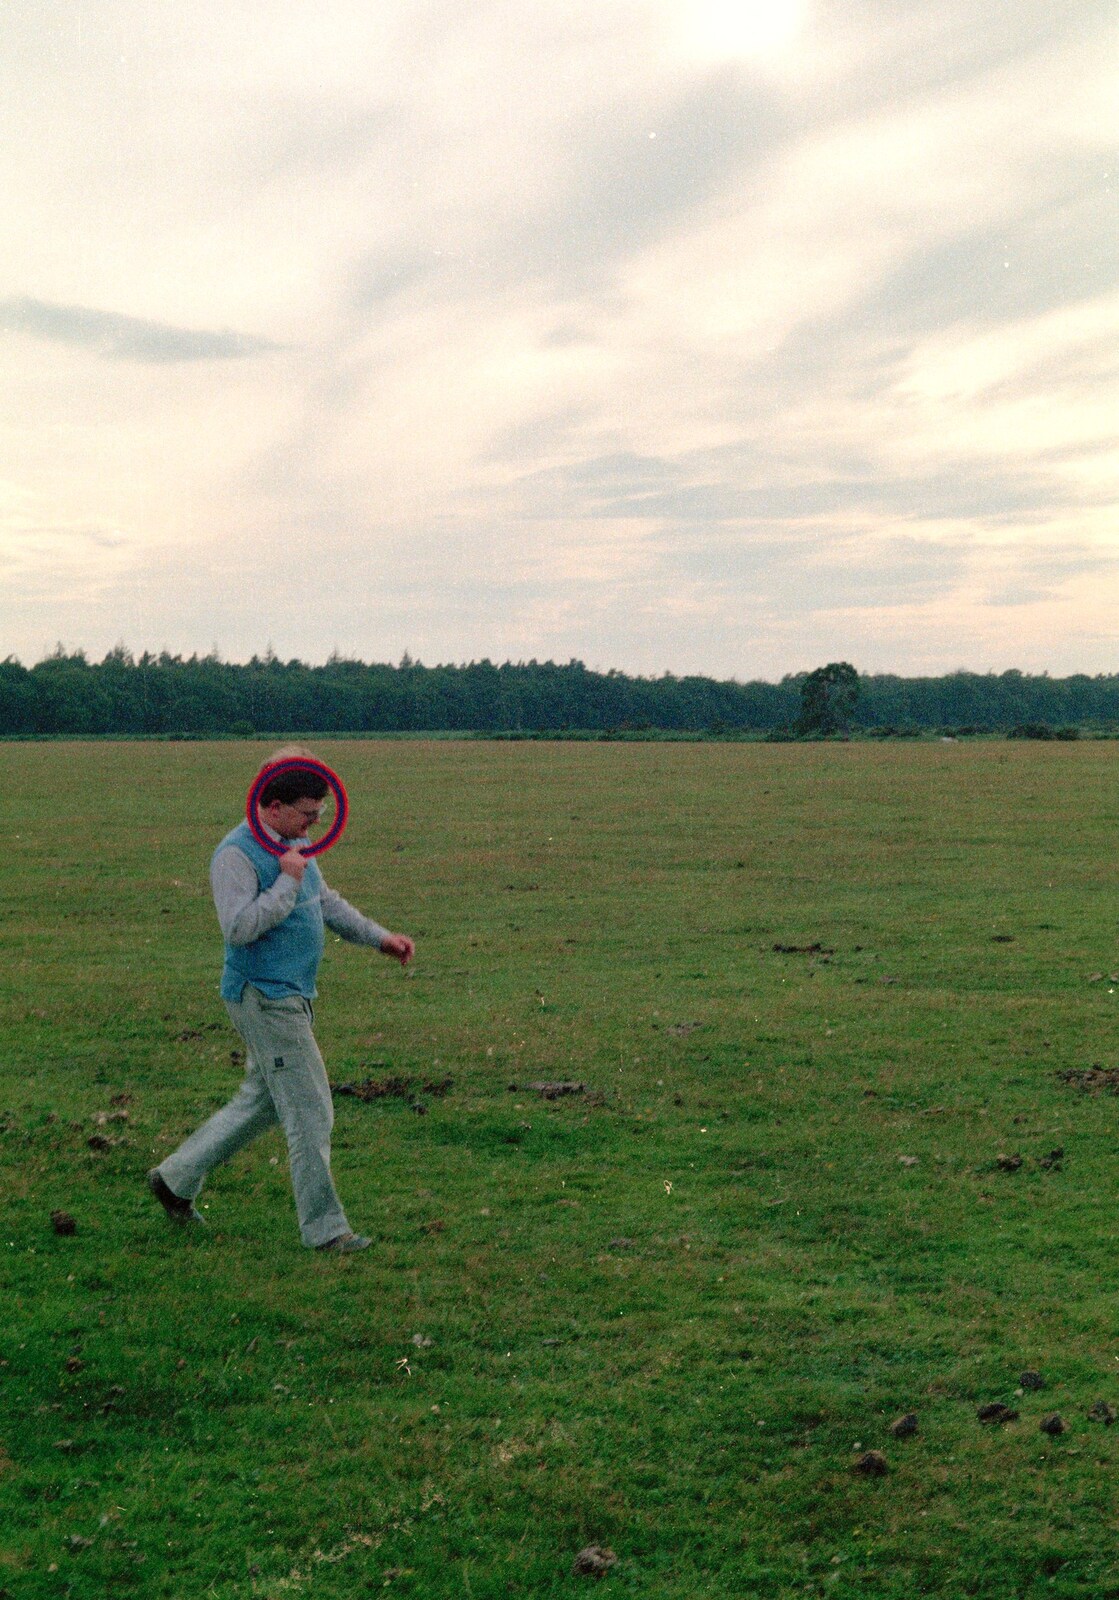 Hamish with a flying disc on his head from A Vineyard Miscellany, Bransgore and the New Forest - 18th July 1986